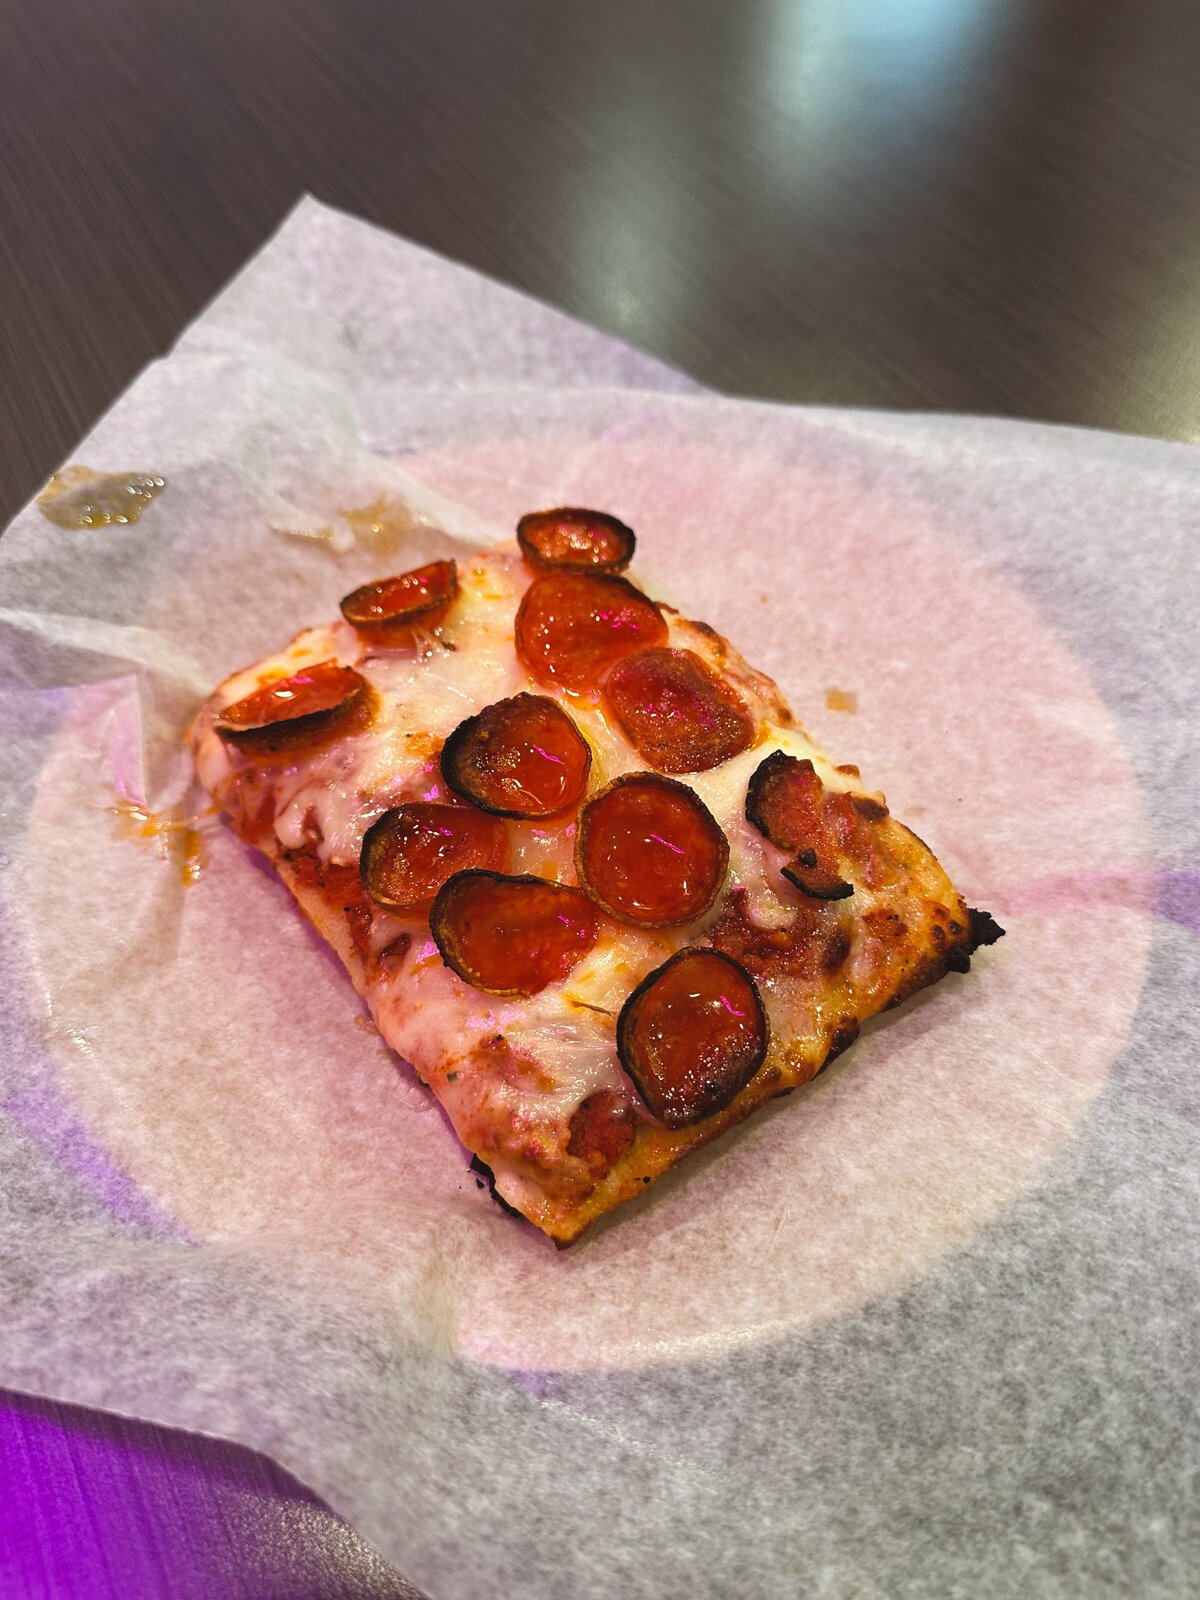 A slice of Pepperoni Homie from Papi's Pizza.